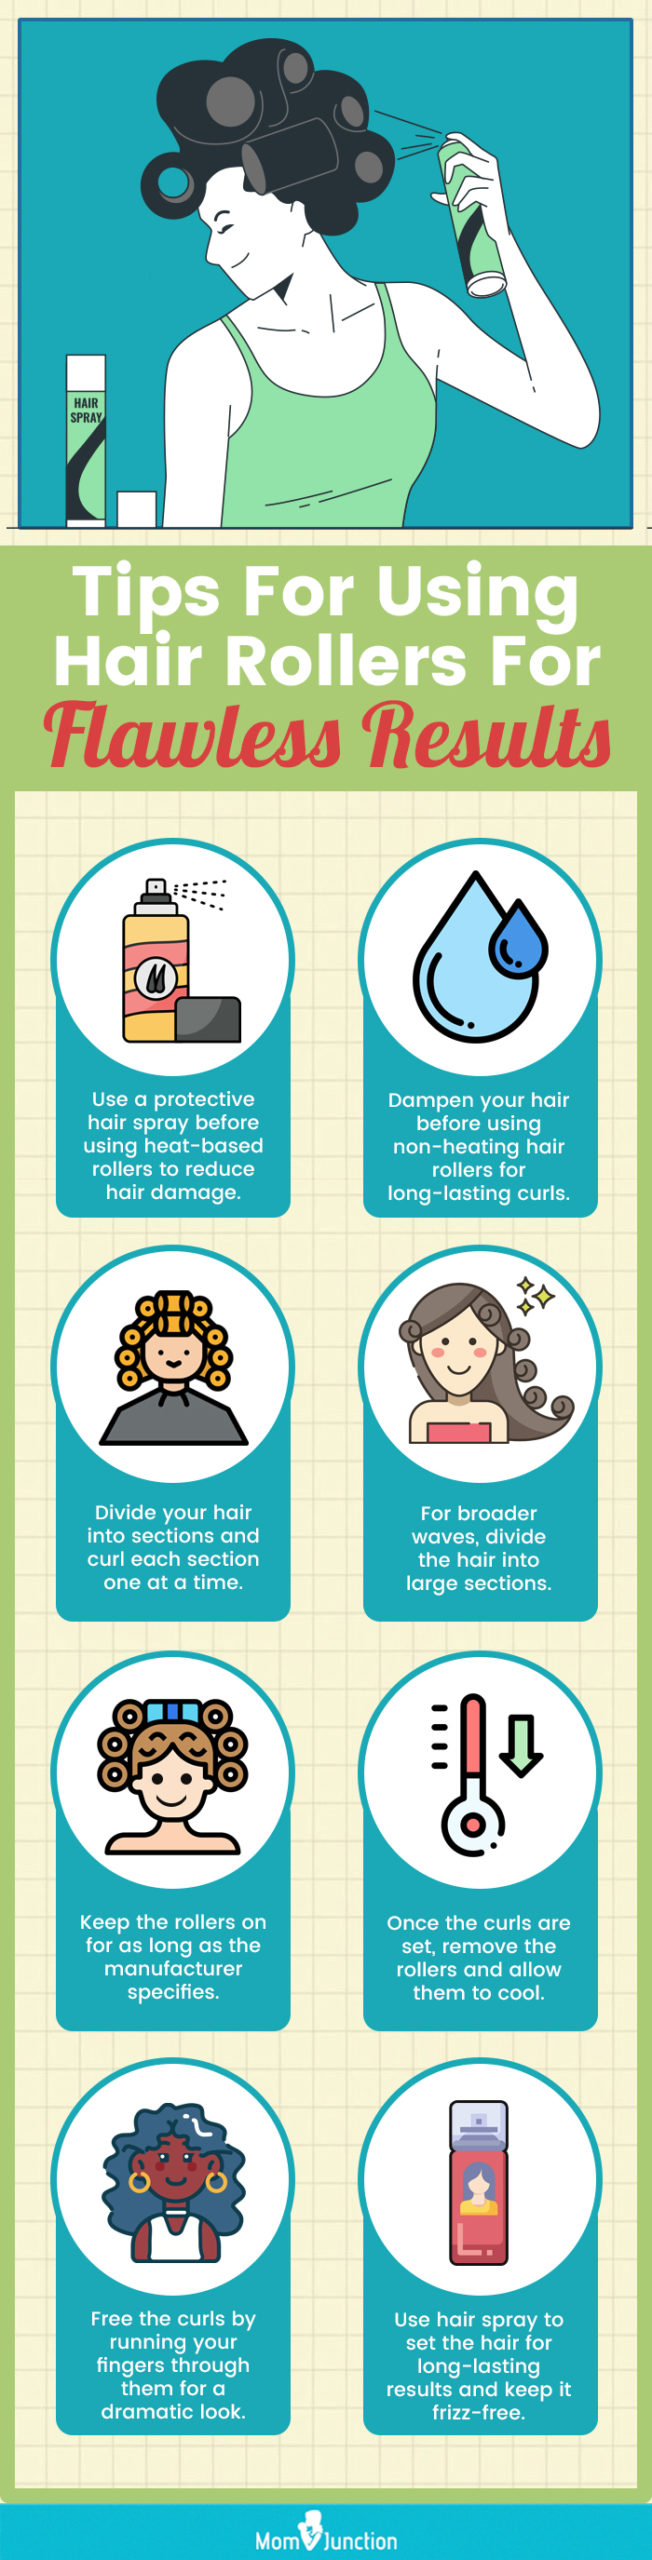 Tips For Using Hair Rollers For Flawless Results (Infographic)